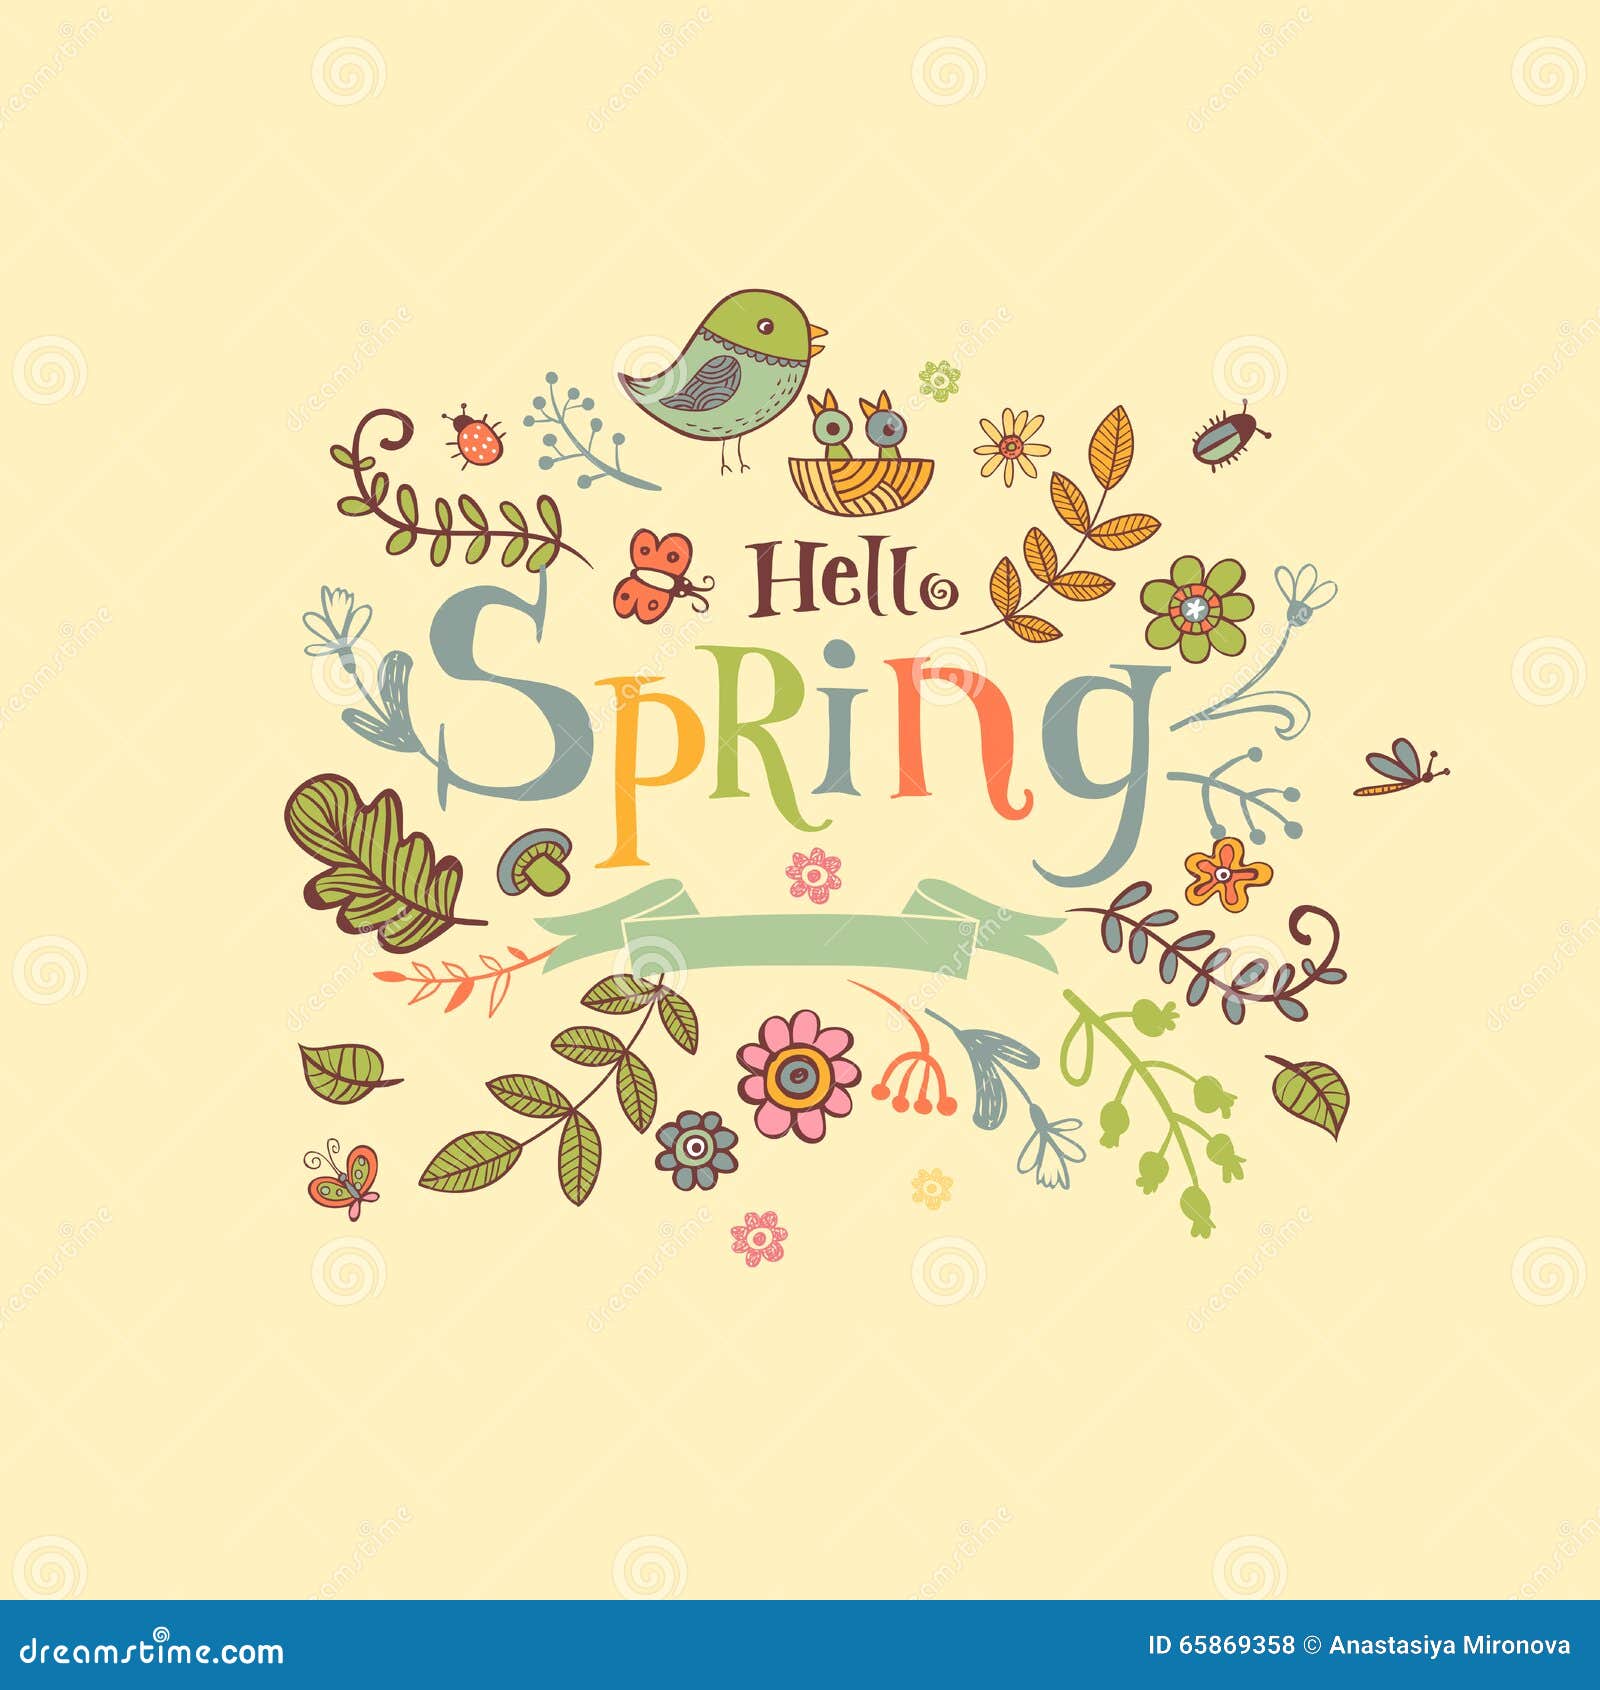 hello spring banner in doodle style